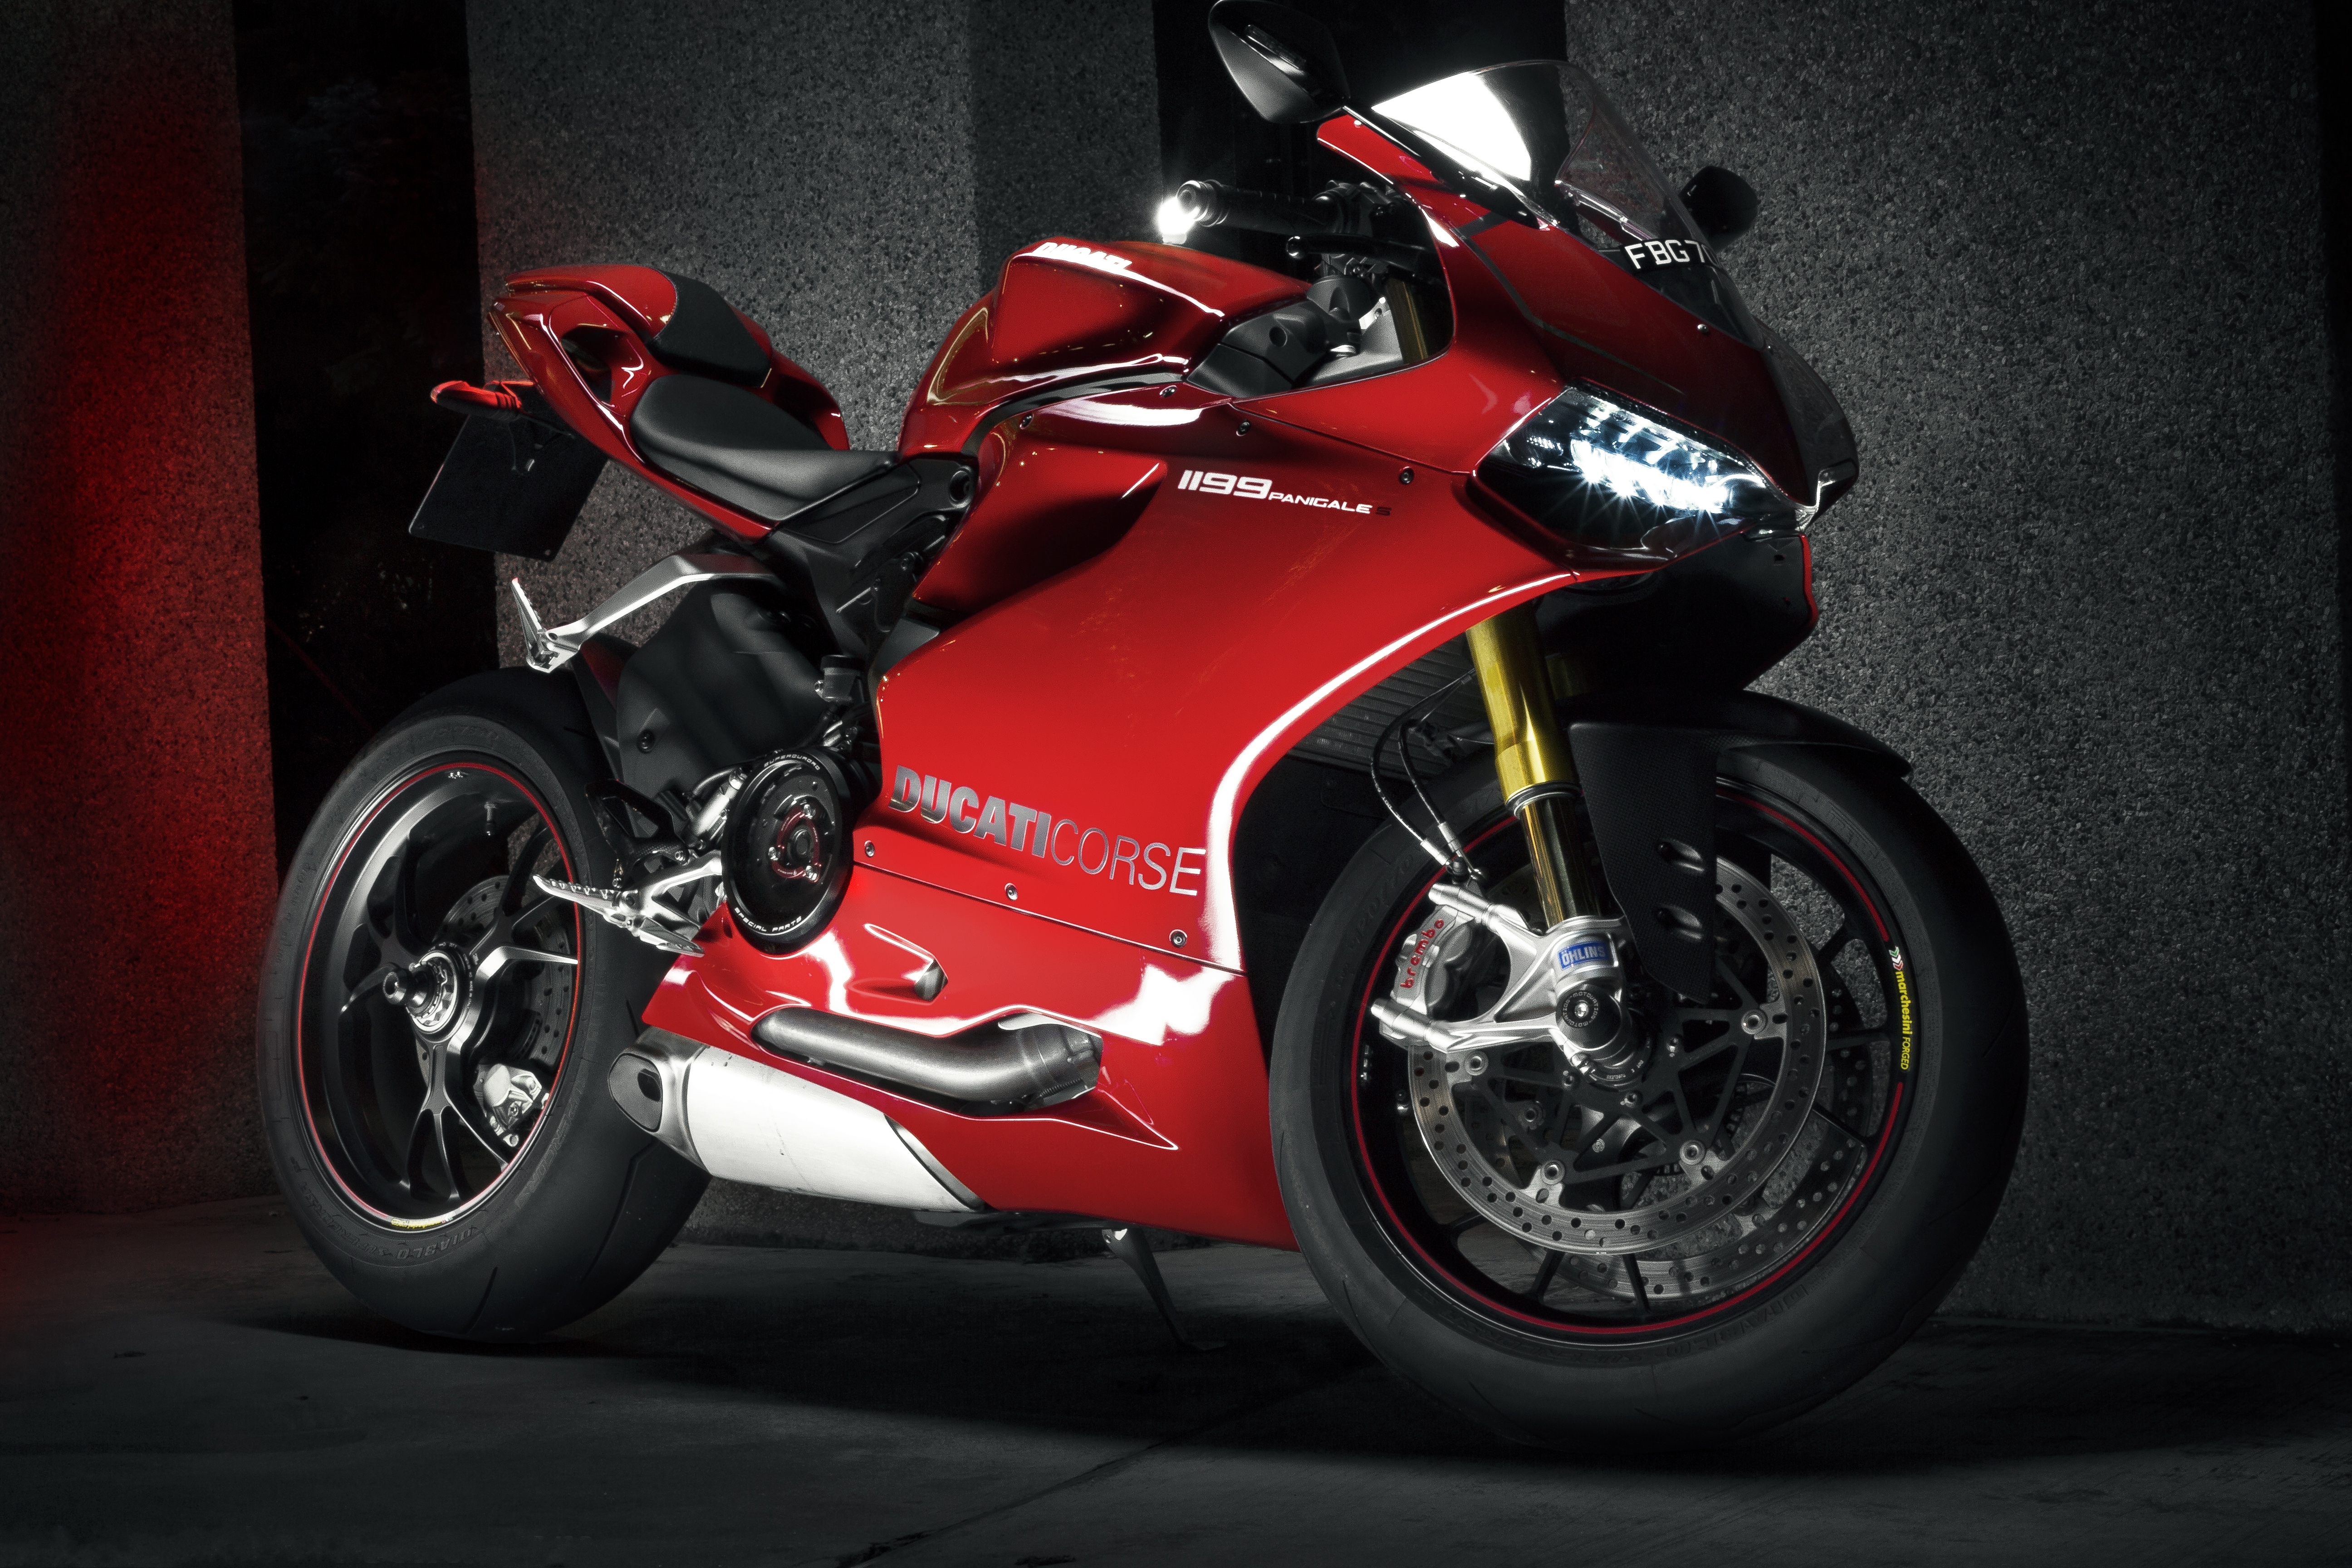 motorcycle, ducati, motorcycles, red, 1199, ducati 1199 panigale